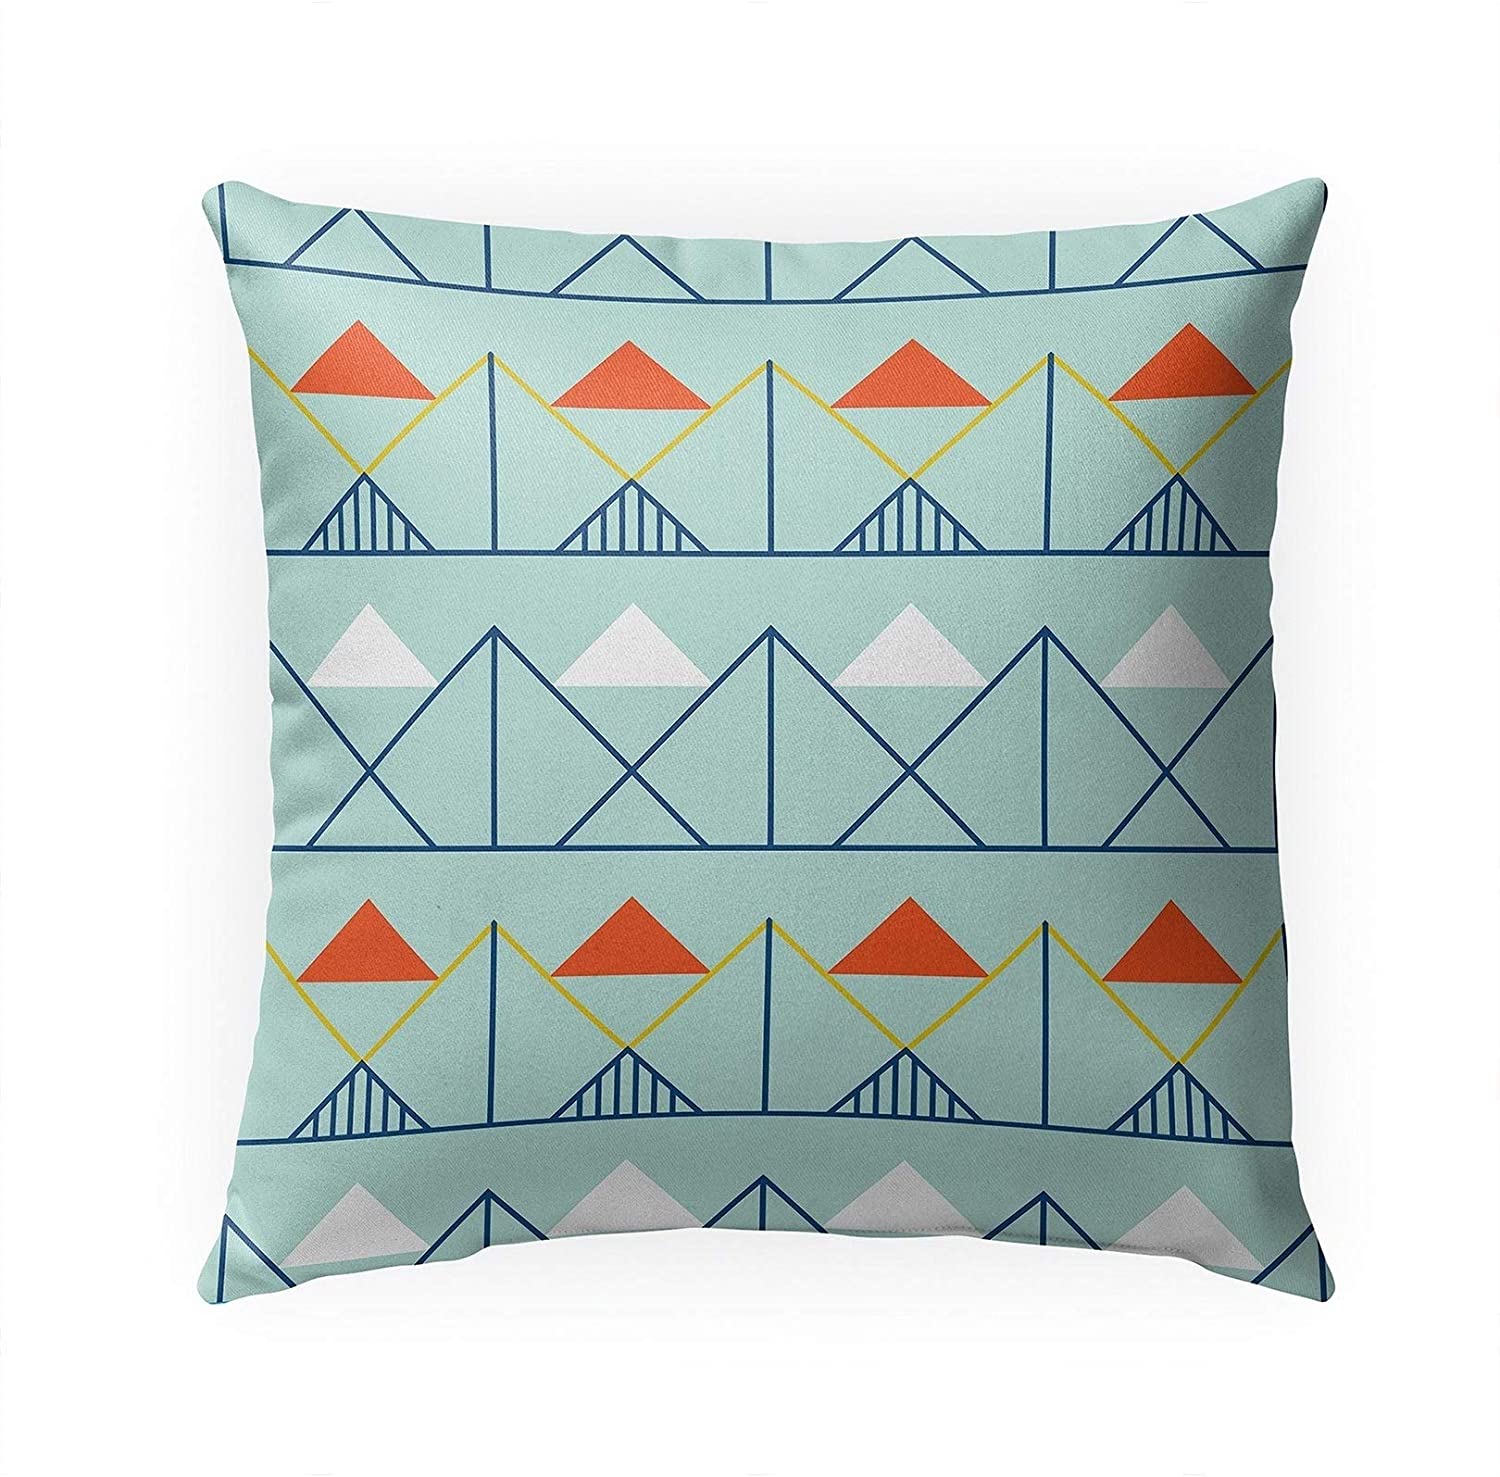 Bridge Indoor|Outdoor Pillow by Chi Hey Lee 18x18 Blue Geometric Modern Contemporary Polyester Removable Cover